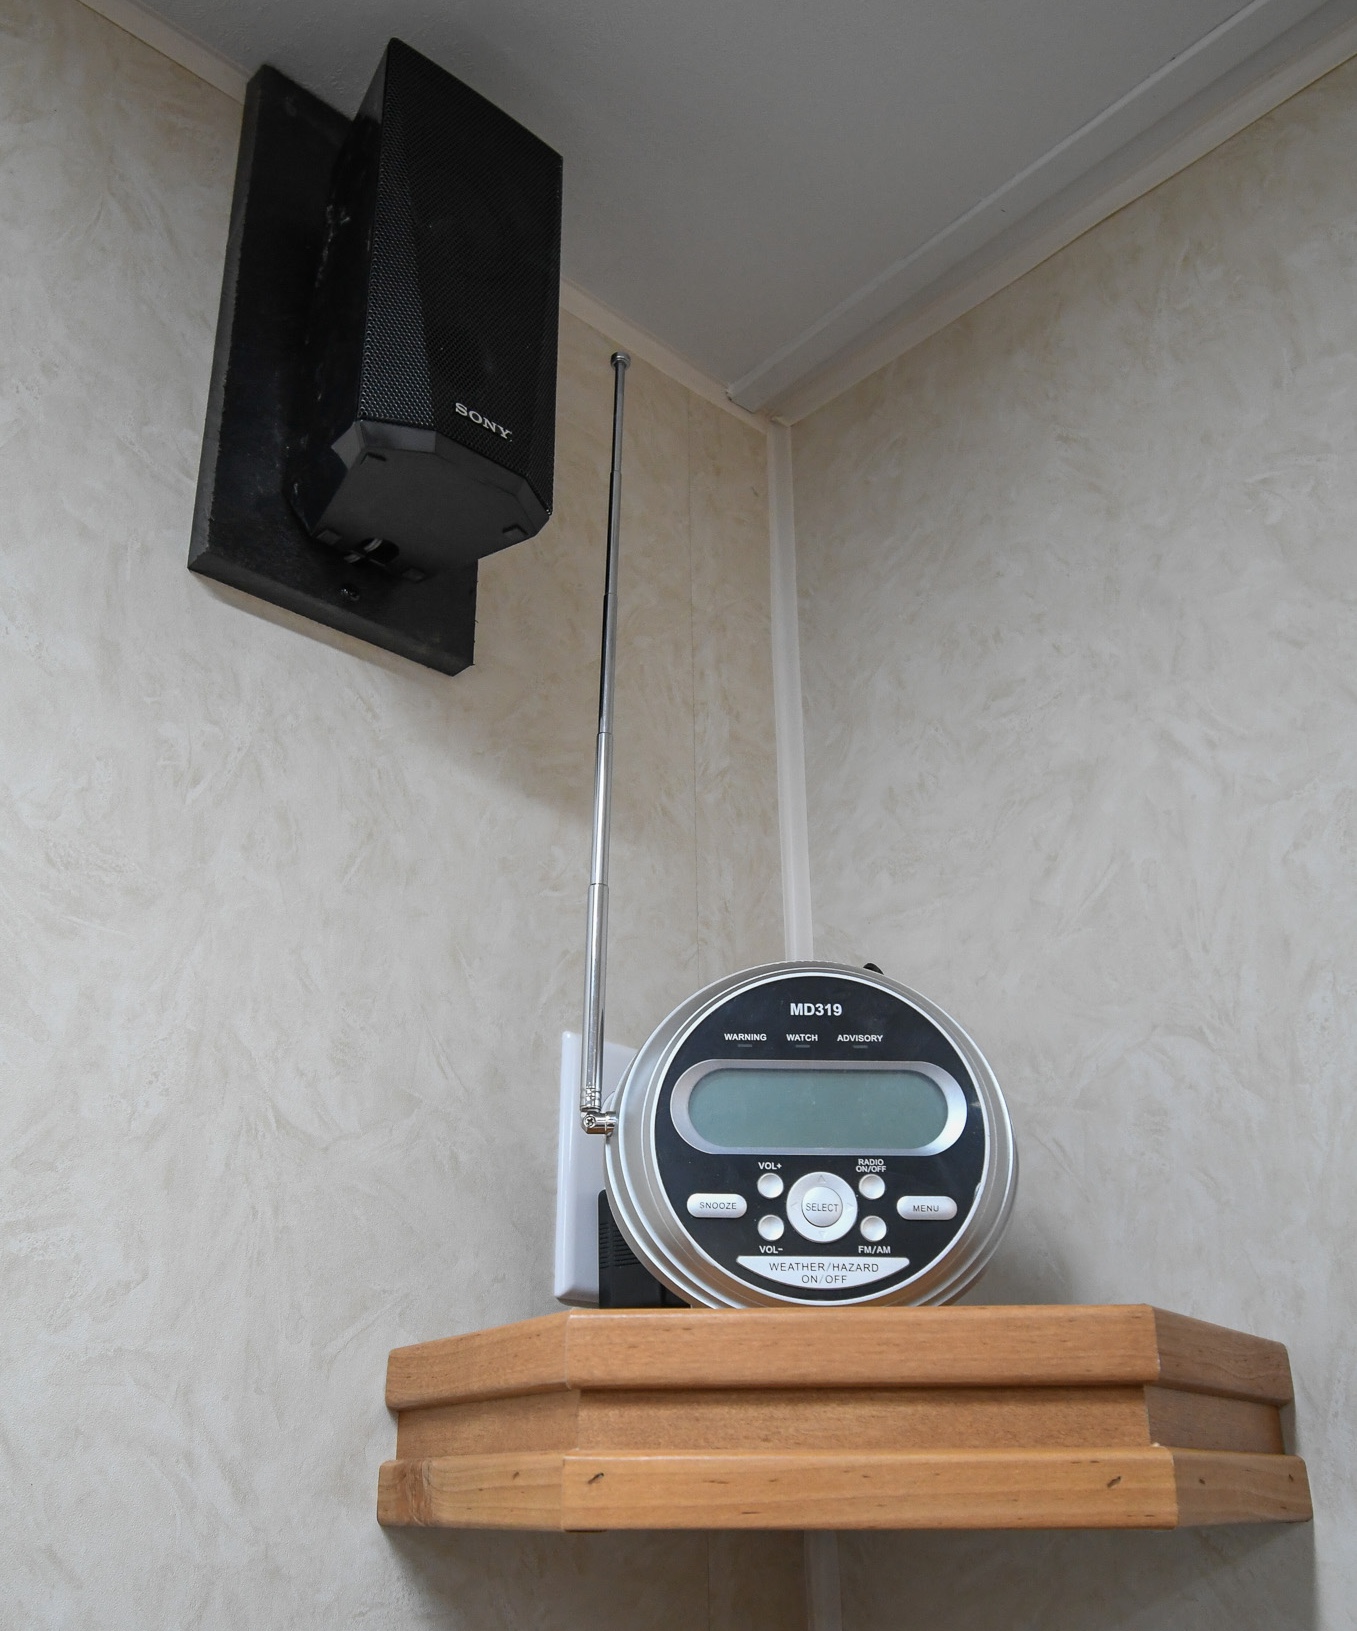 A view of one of the surround sound speakers and the weather radio.